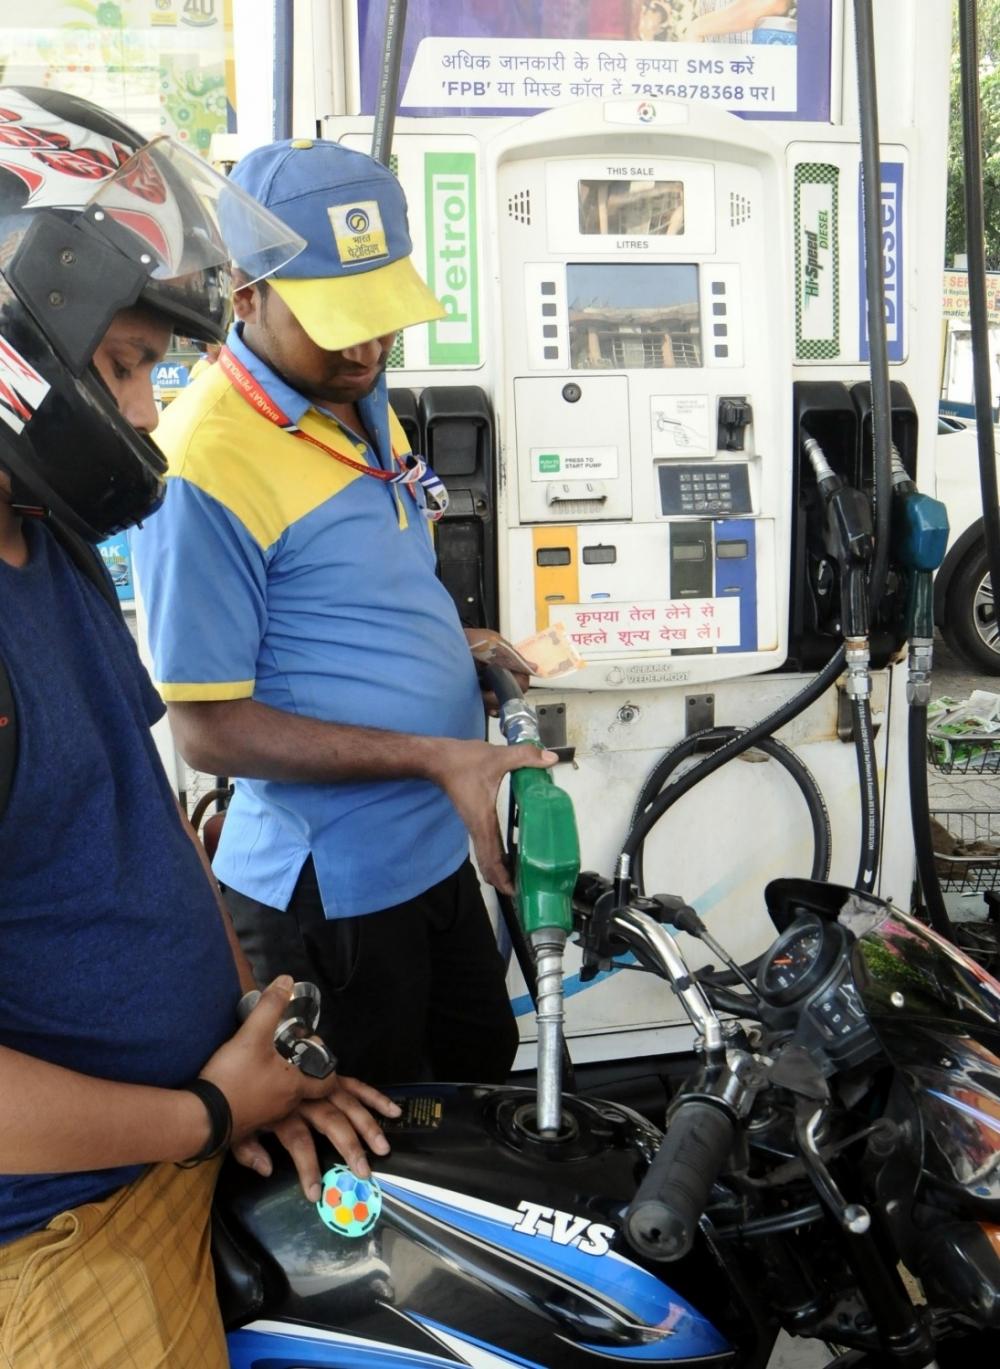 The Weekend Leader - Auto fuel prices rise simultaneously after a day's break